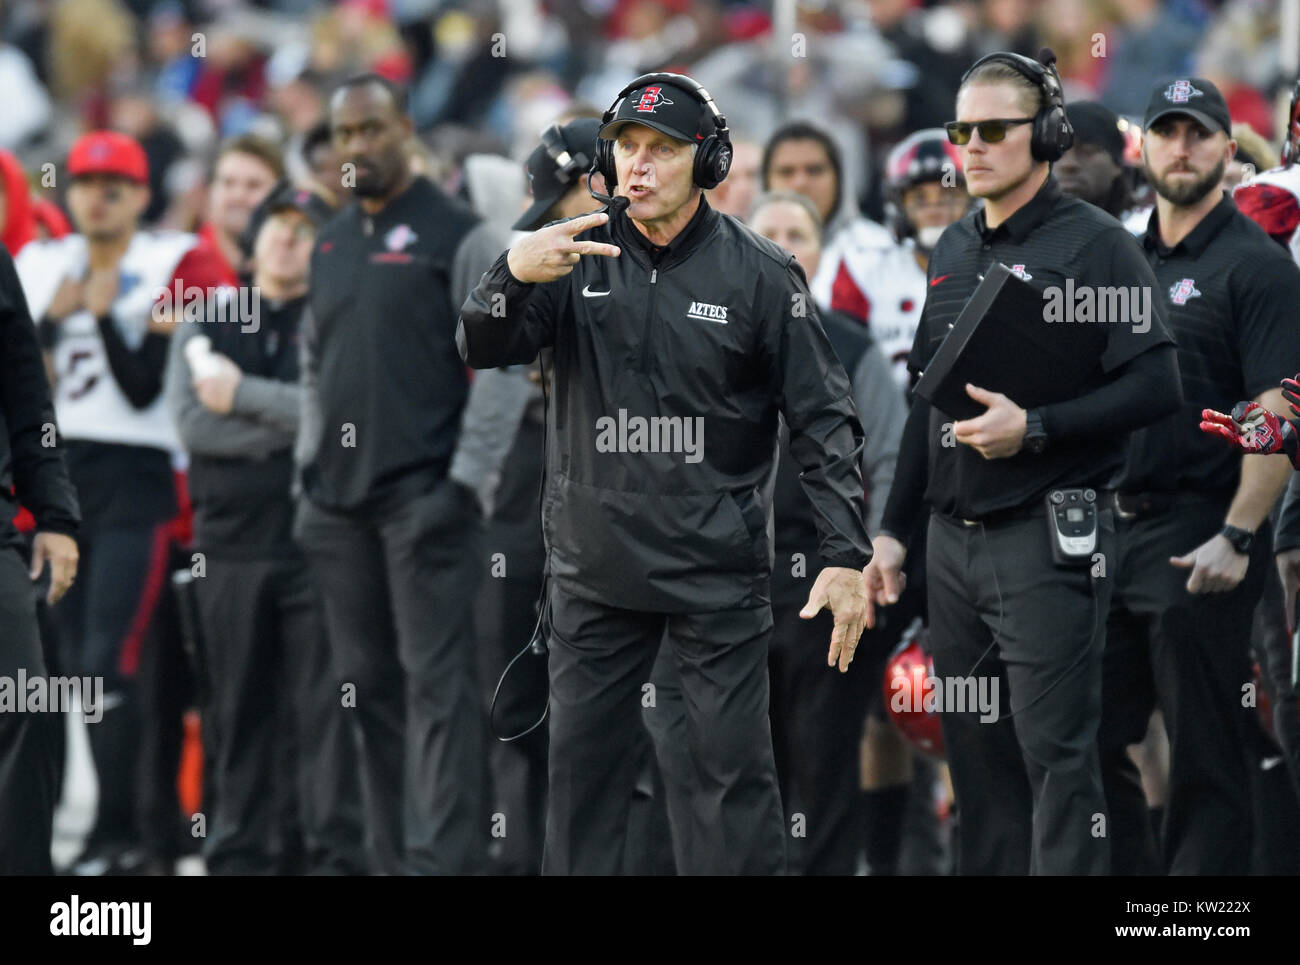 December 23, 2017 - San Diego State coach Rocky Long makes a call to his players during the second quarter of a NCAA college football game against Army in the Lockheed Martin Armed Forces Bowl at Amon G. Carter Stadium in Fort Worth, Texas. Army won 42-35. Austin McAfee/CSM Stock Photo